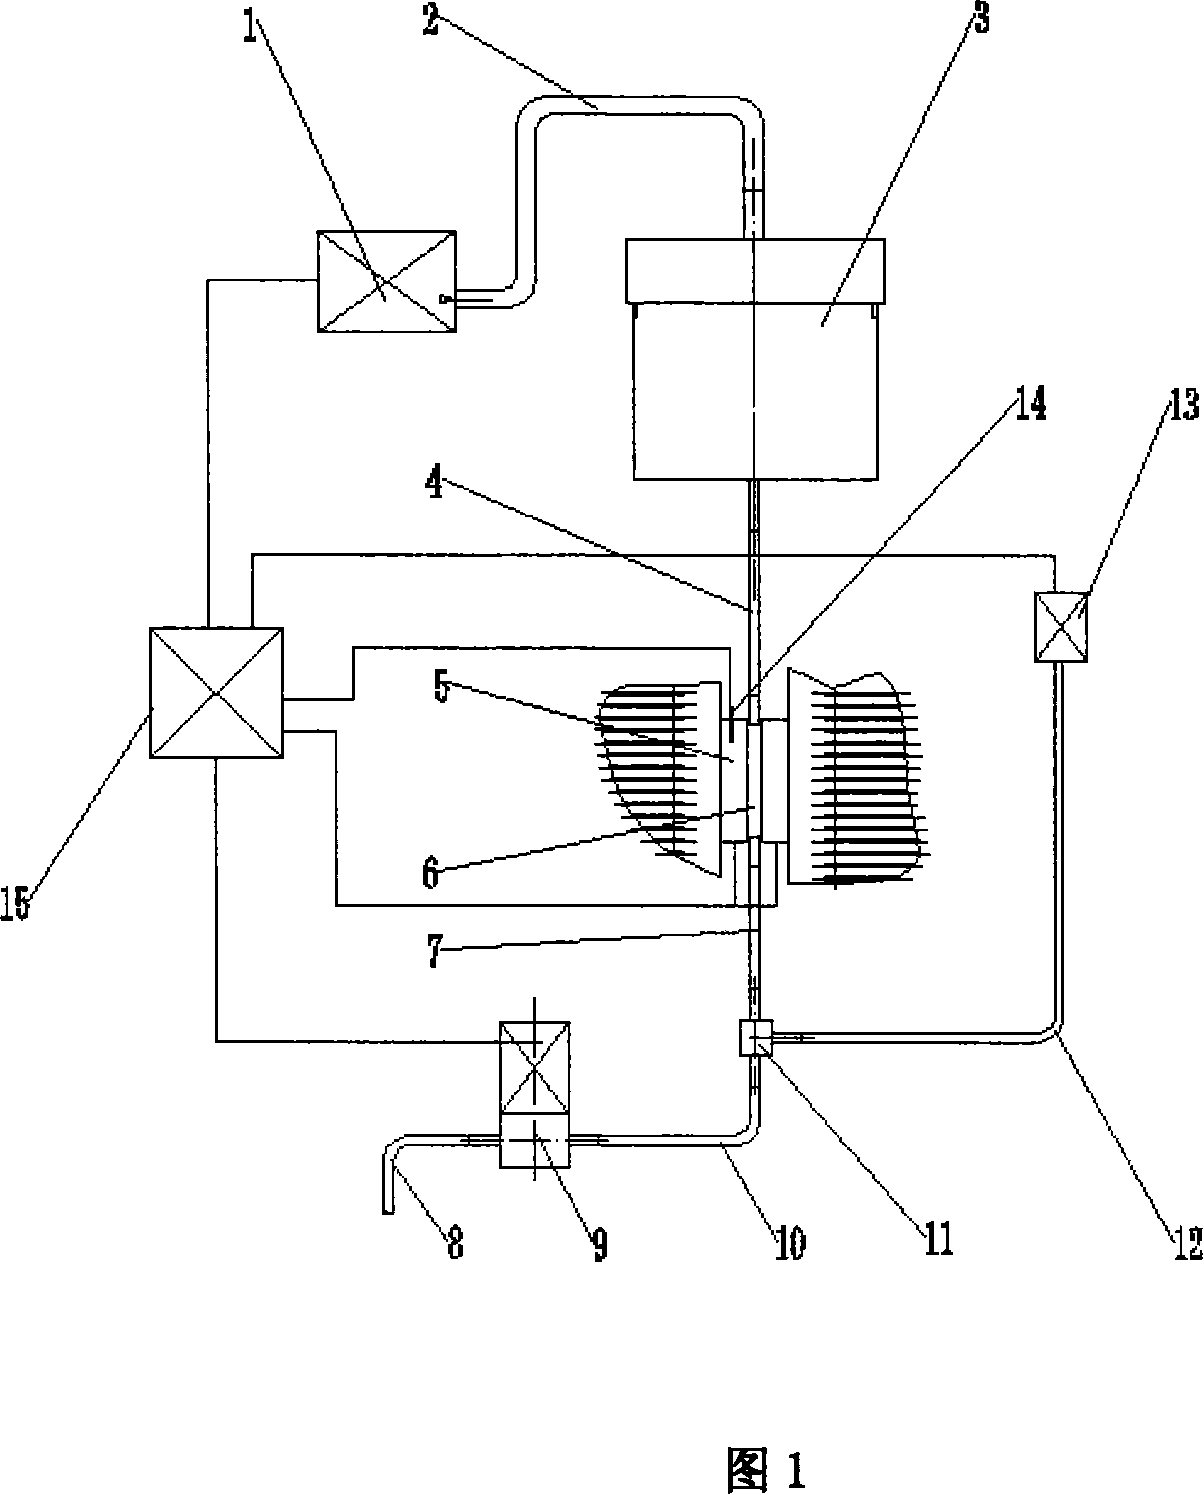 Petroleum product condensation point metering device